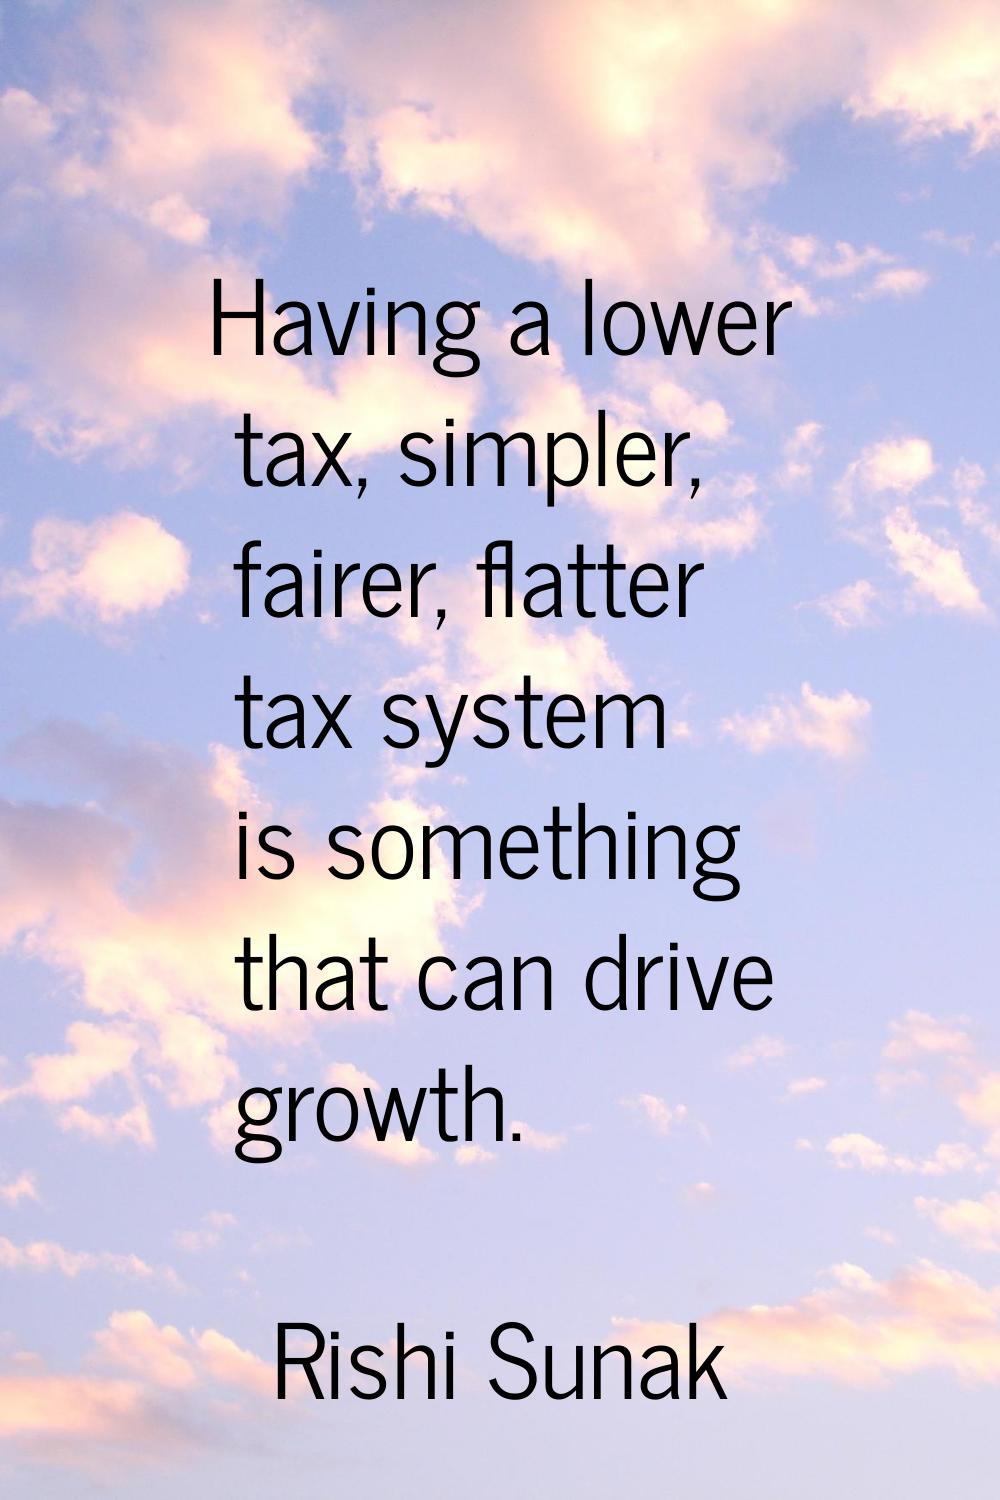 Having a lower tax, simpler, fairer, flatter tax system is something that can drive growth.